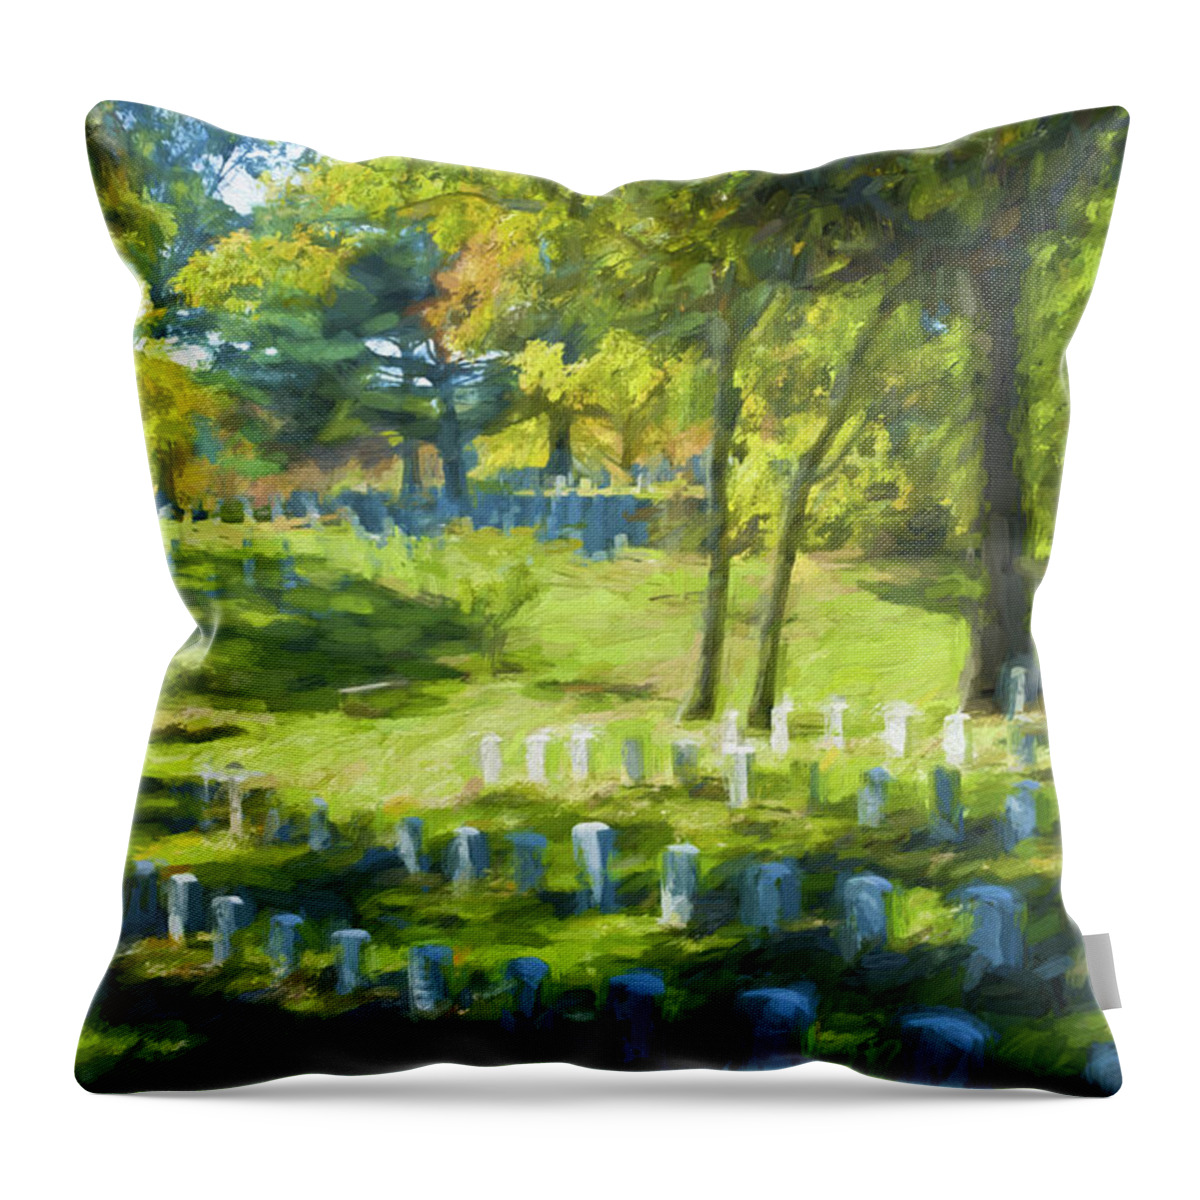 Topaz Throw Pillow featuring the photograph Sleep Time by Paul W Faust - Impressions of Light